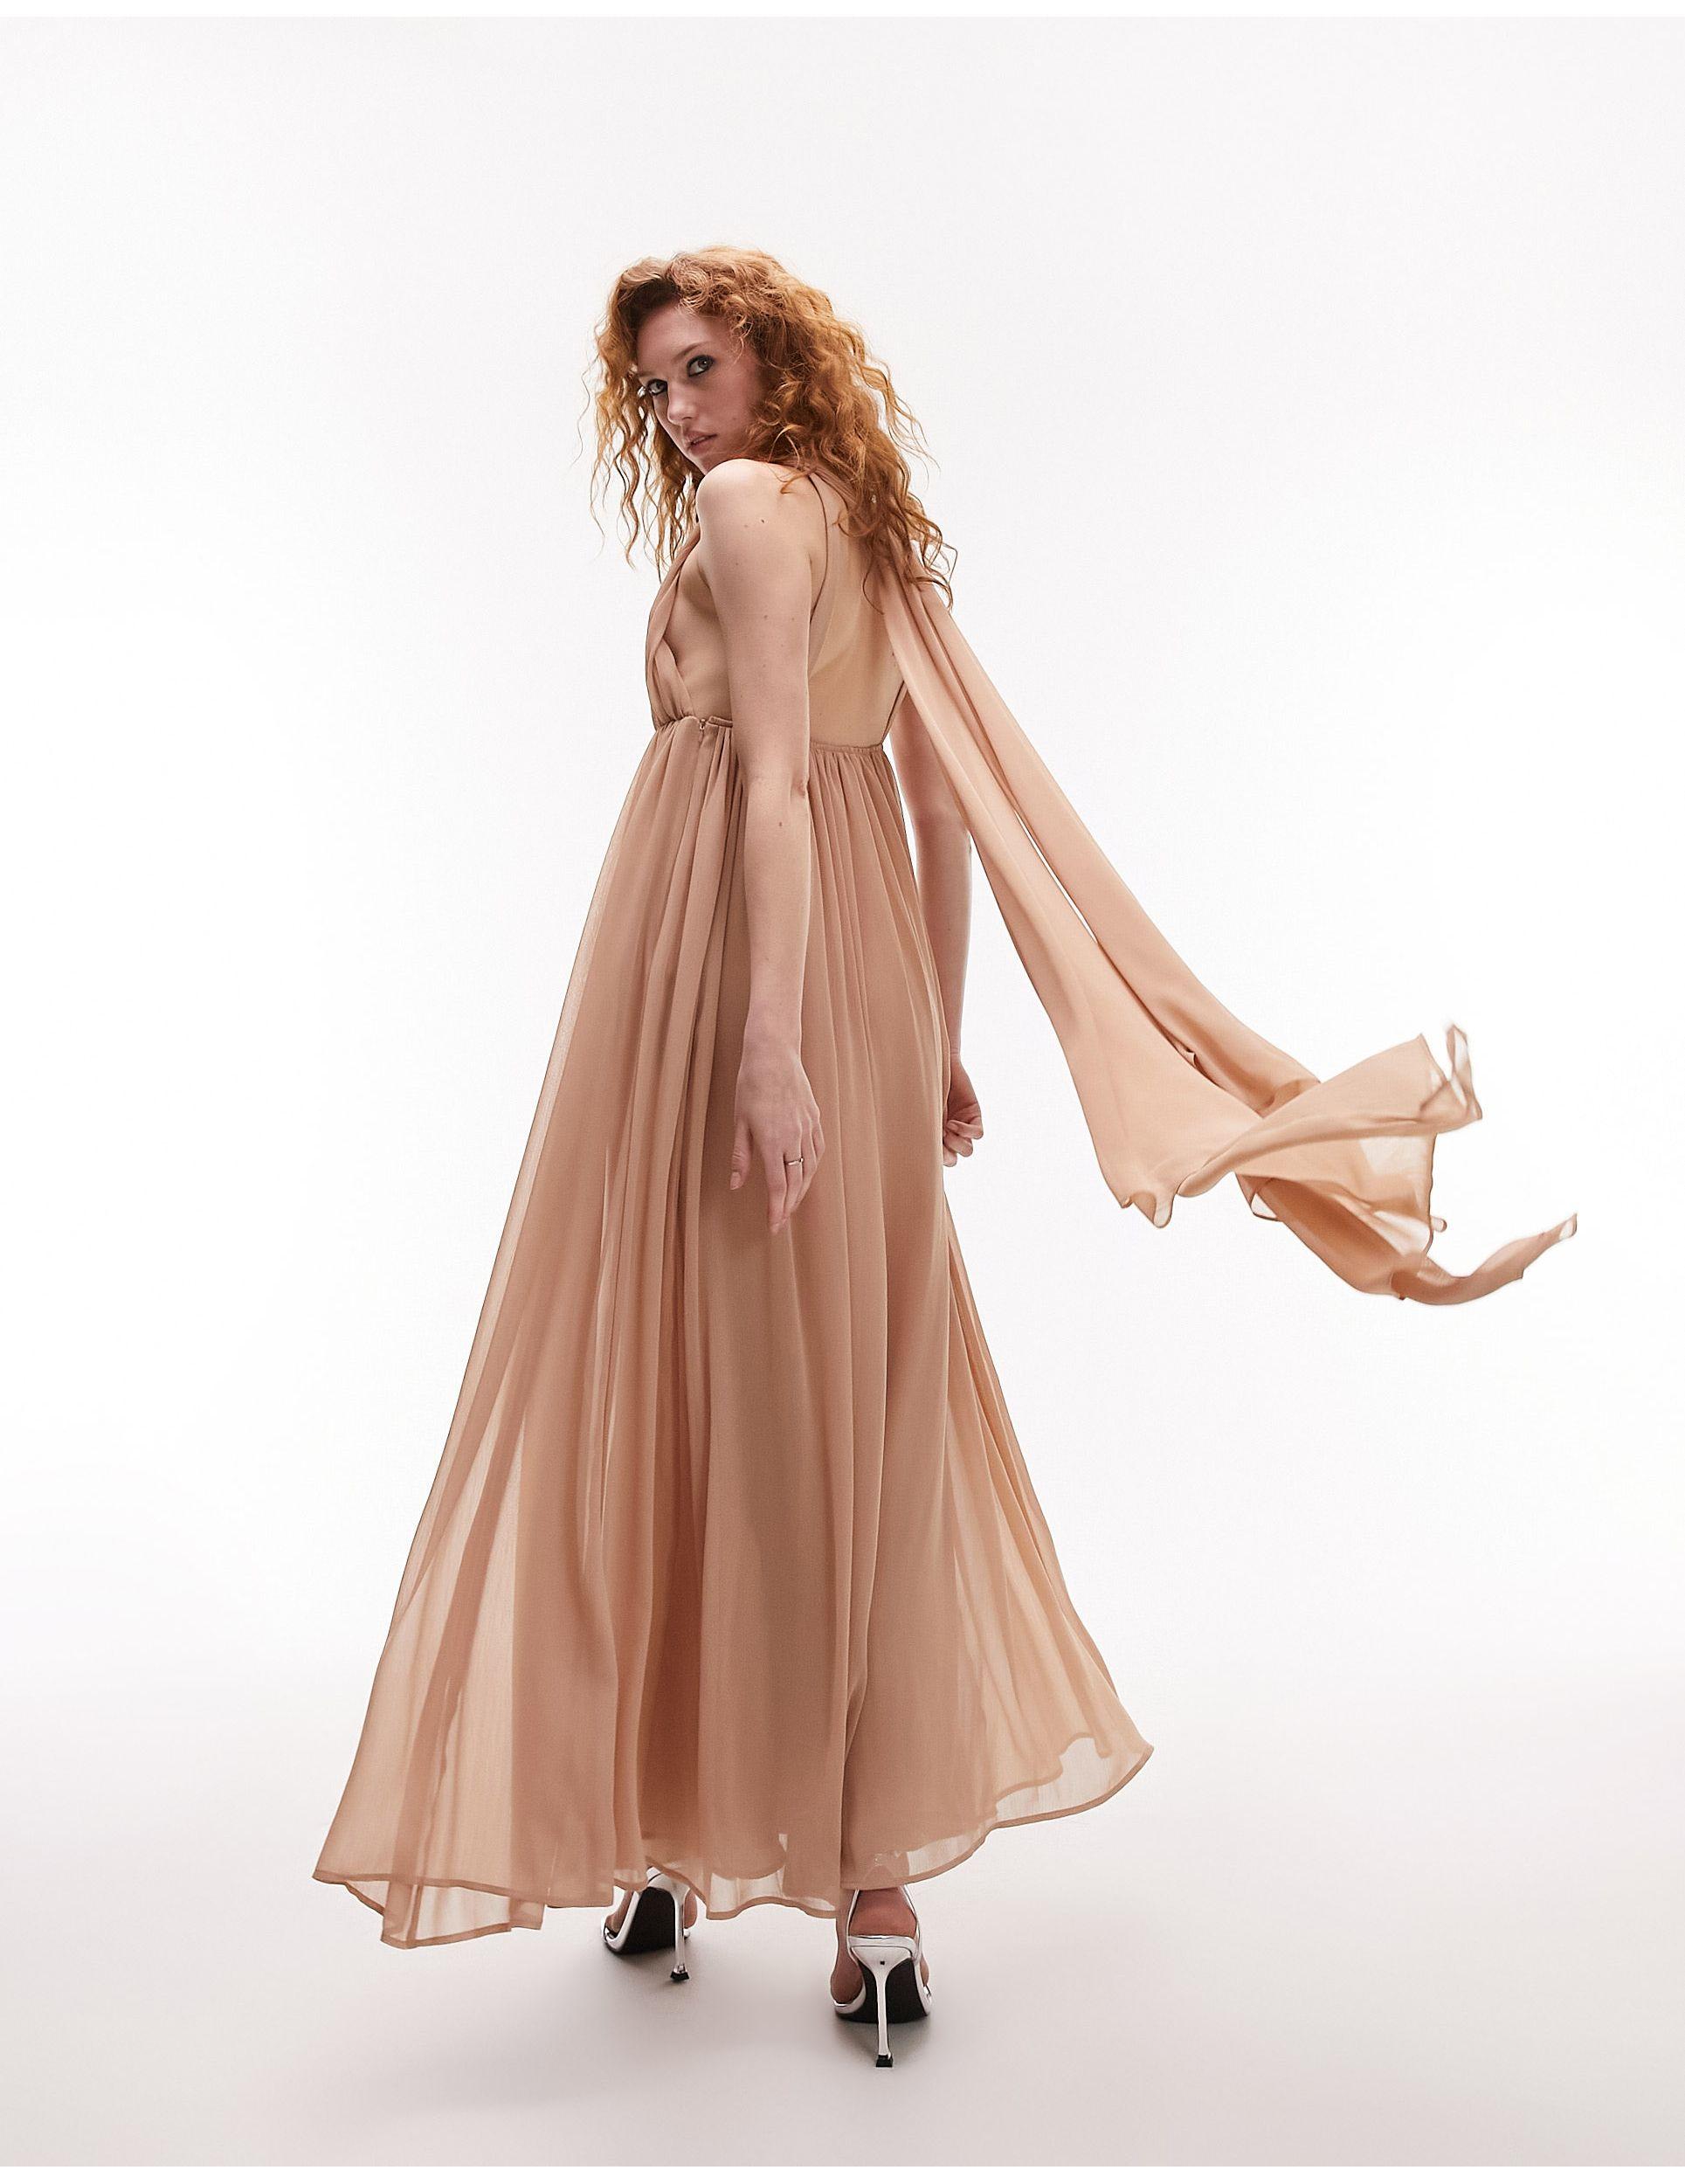 TOPSHOP Goddess Gown Occasion Maxi Dress in Pink | Lyst